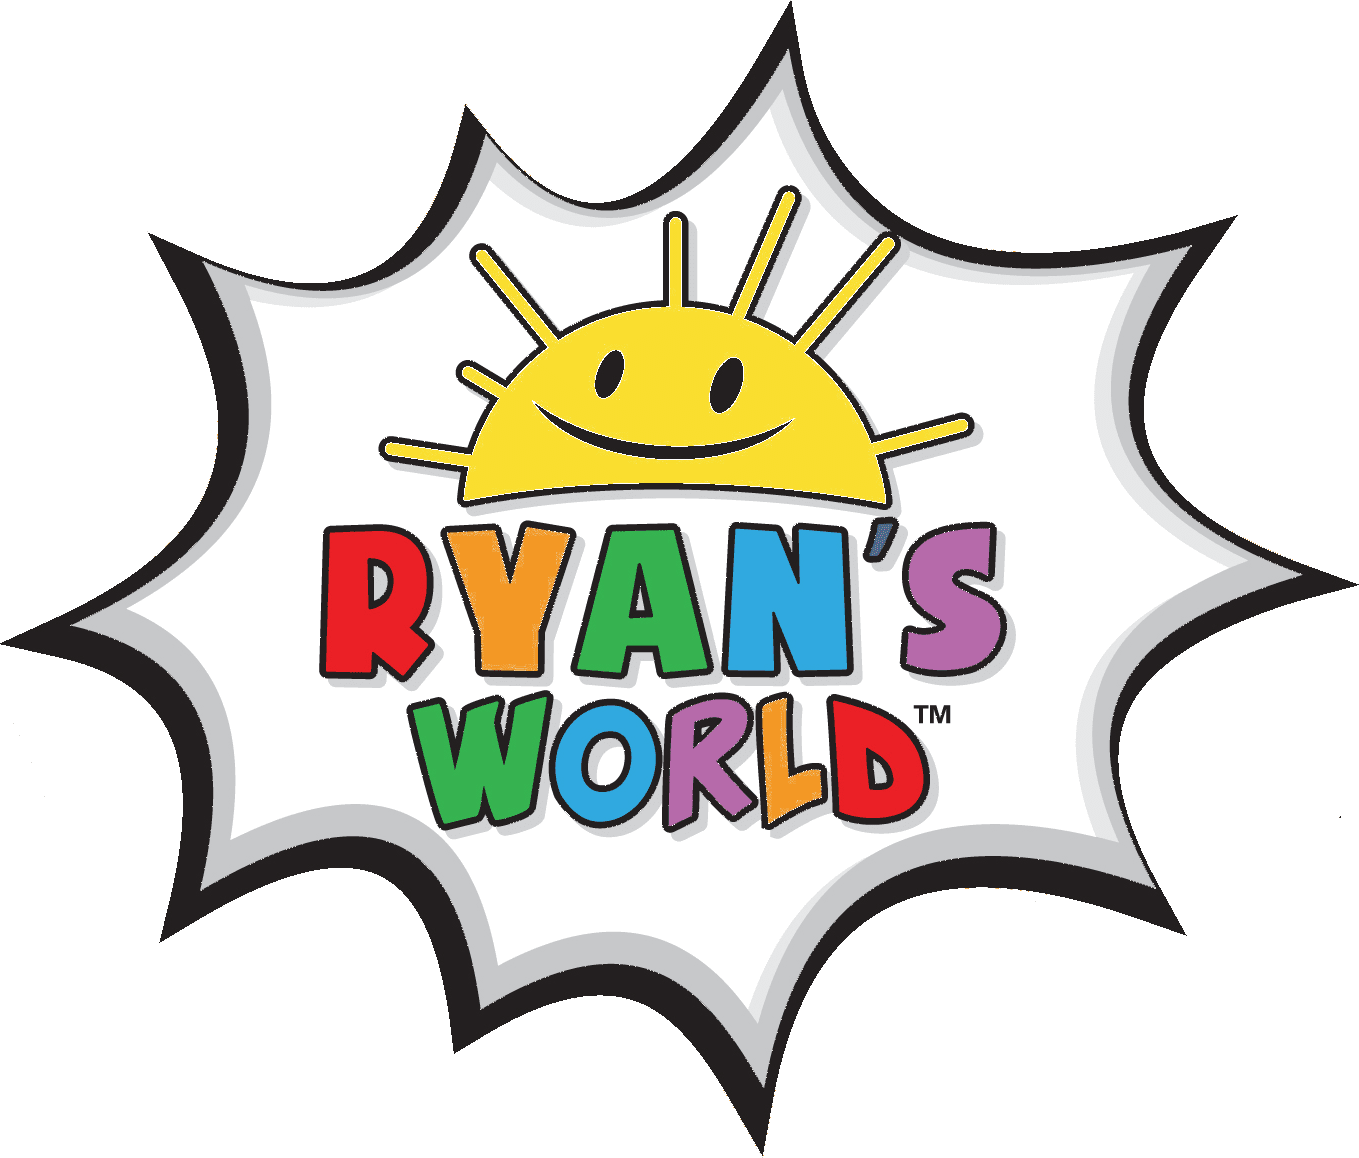 Ryan's World - The Official Website of the Ryan's World Family